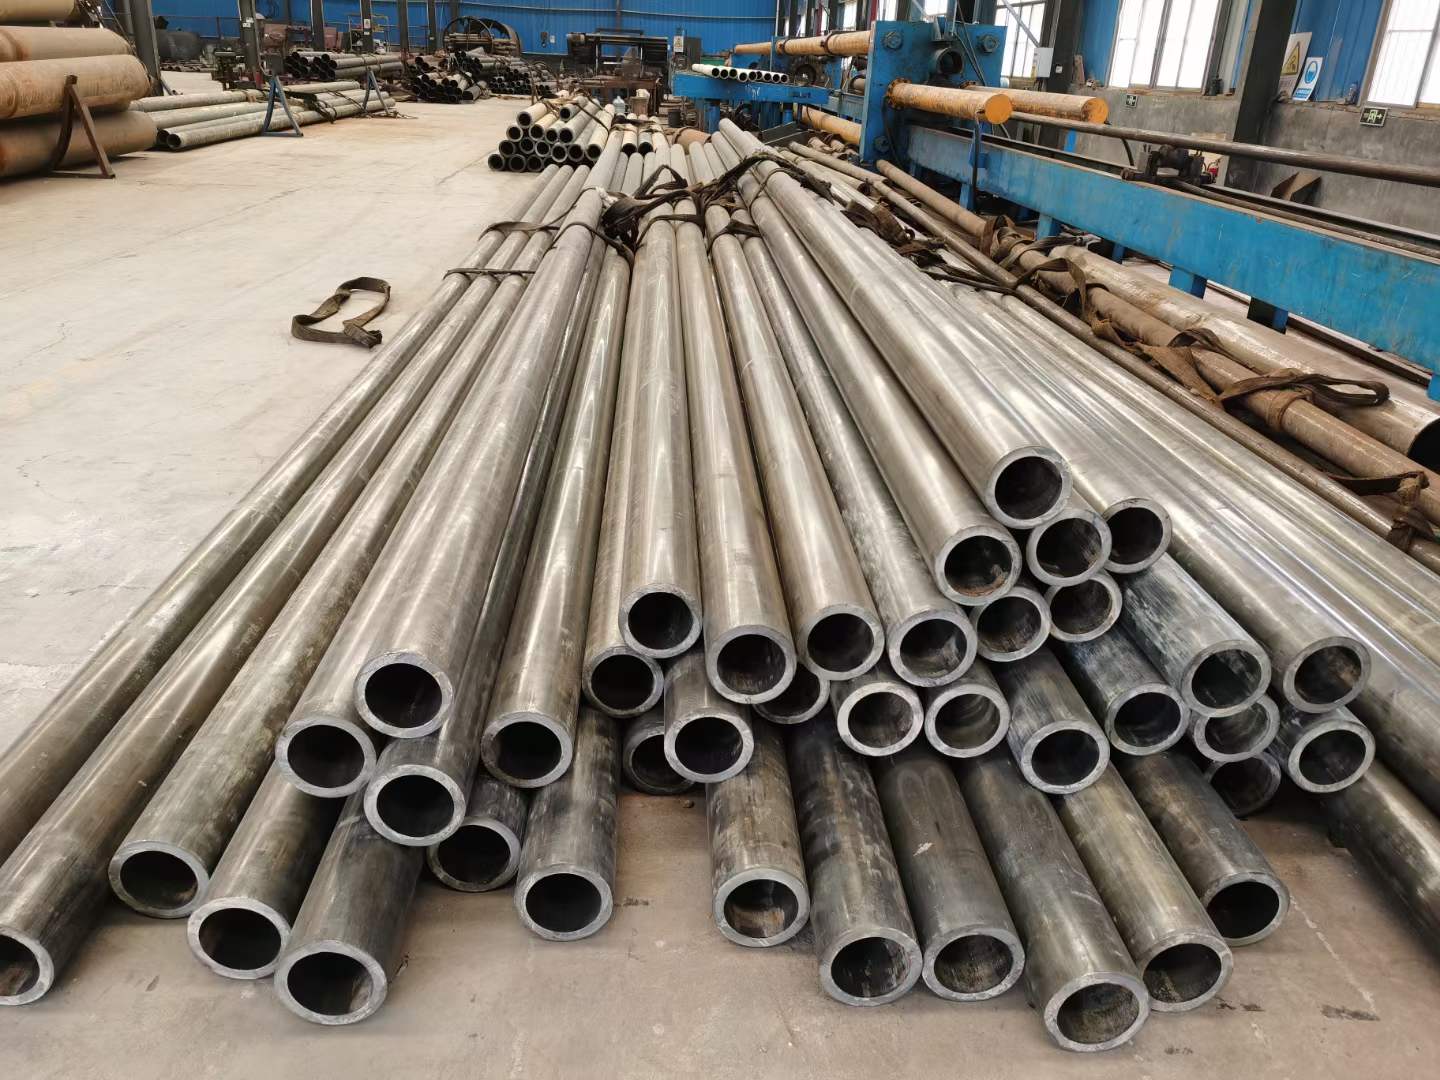 Discuss the significance of machined steel pipe and structural steel pipe (1)